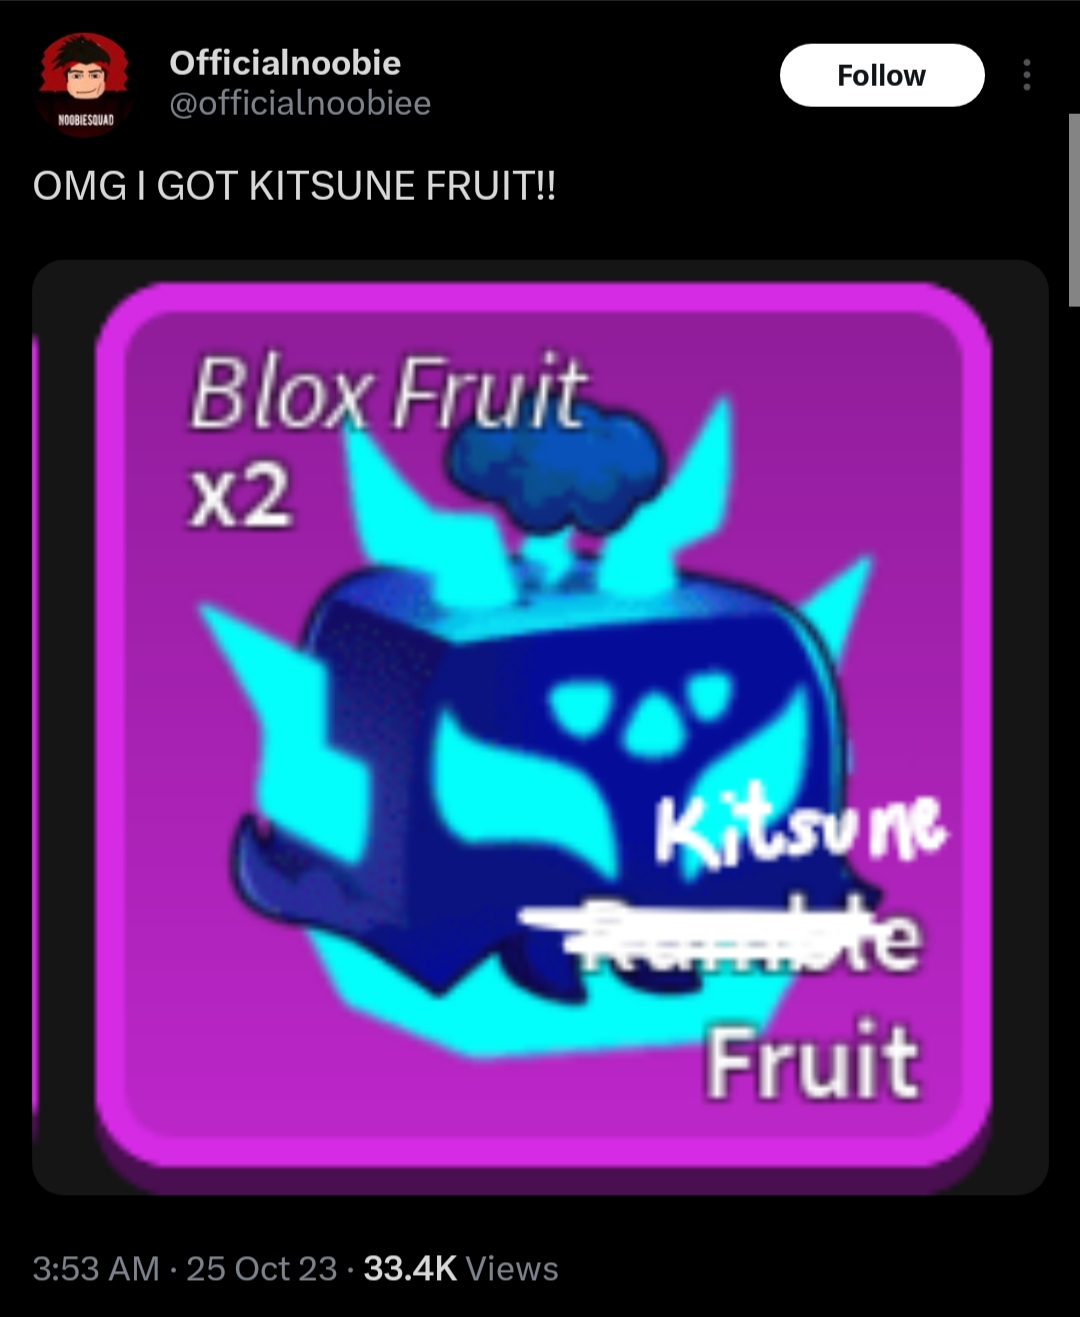 is kitsune fruit in game yet? because if not then how did